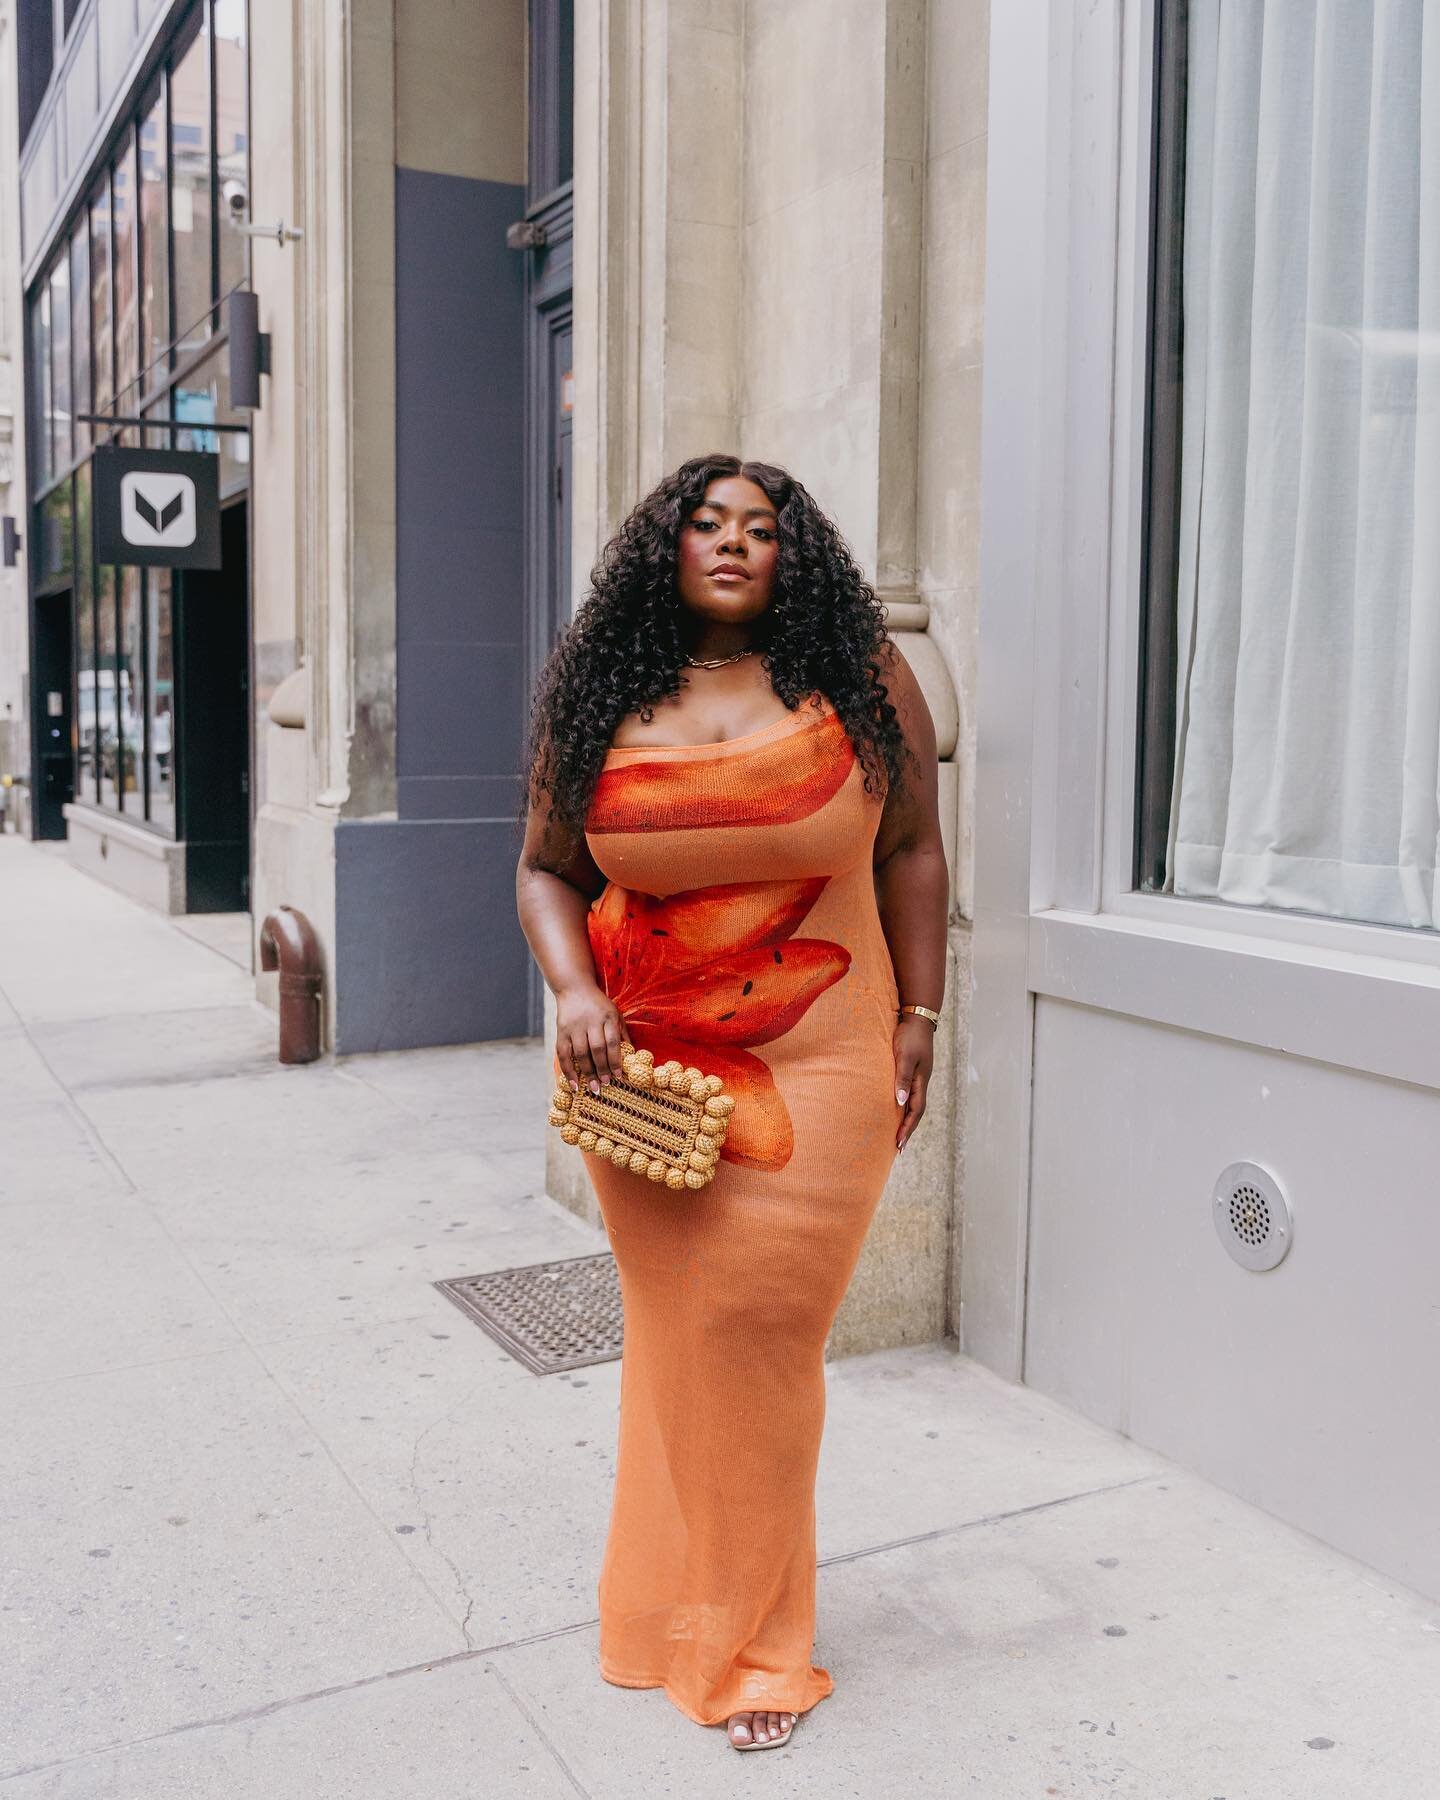 @musingsofacurvylady in orange&gt;&gt;&gt;

NYFW has been so much fun!! Seeing all the looks and creatives being CREATIVE has been so inspiring. 

Next stop: seeing my first ever NY fashion show🫢🤩 someone pinch me 

#NYFW #NYC #nyfashionweek #nyfas